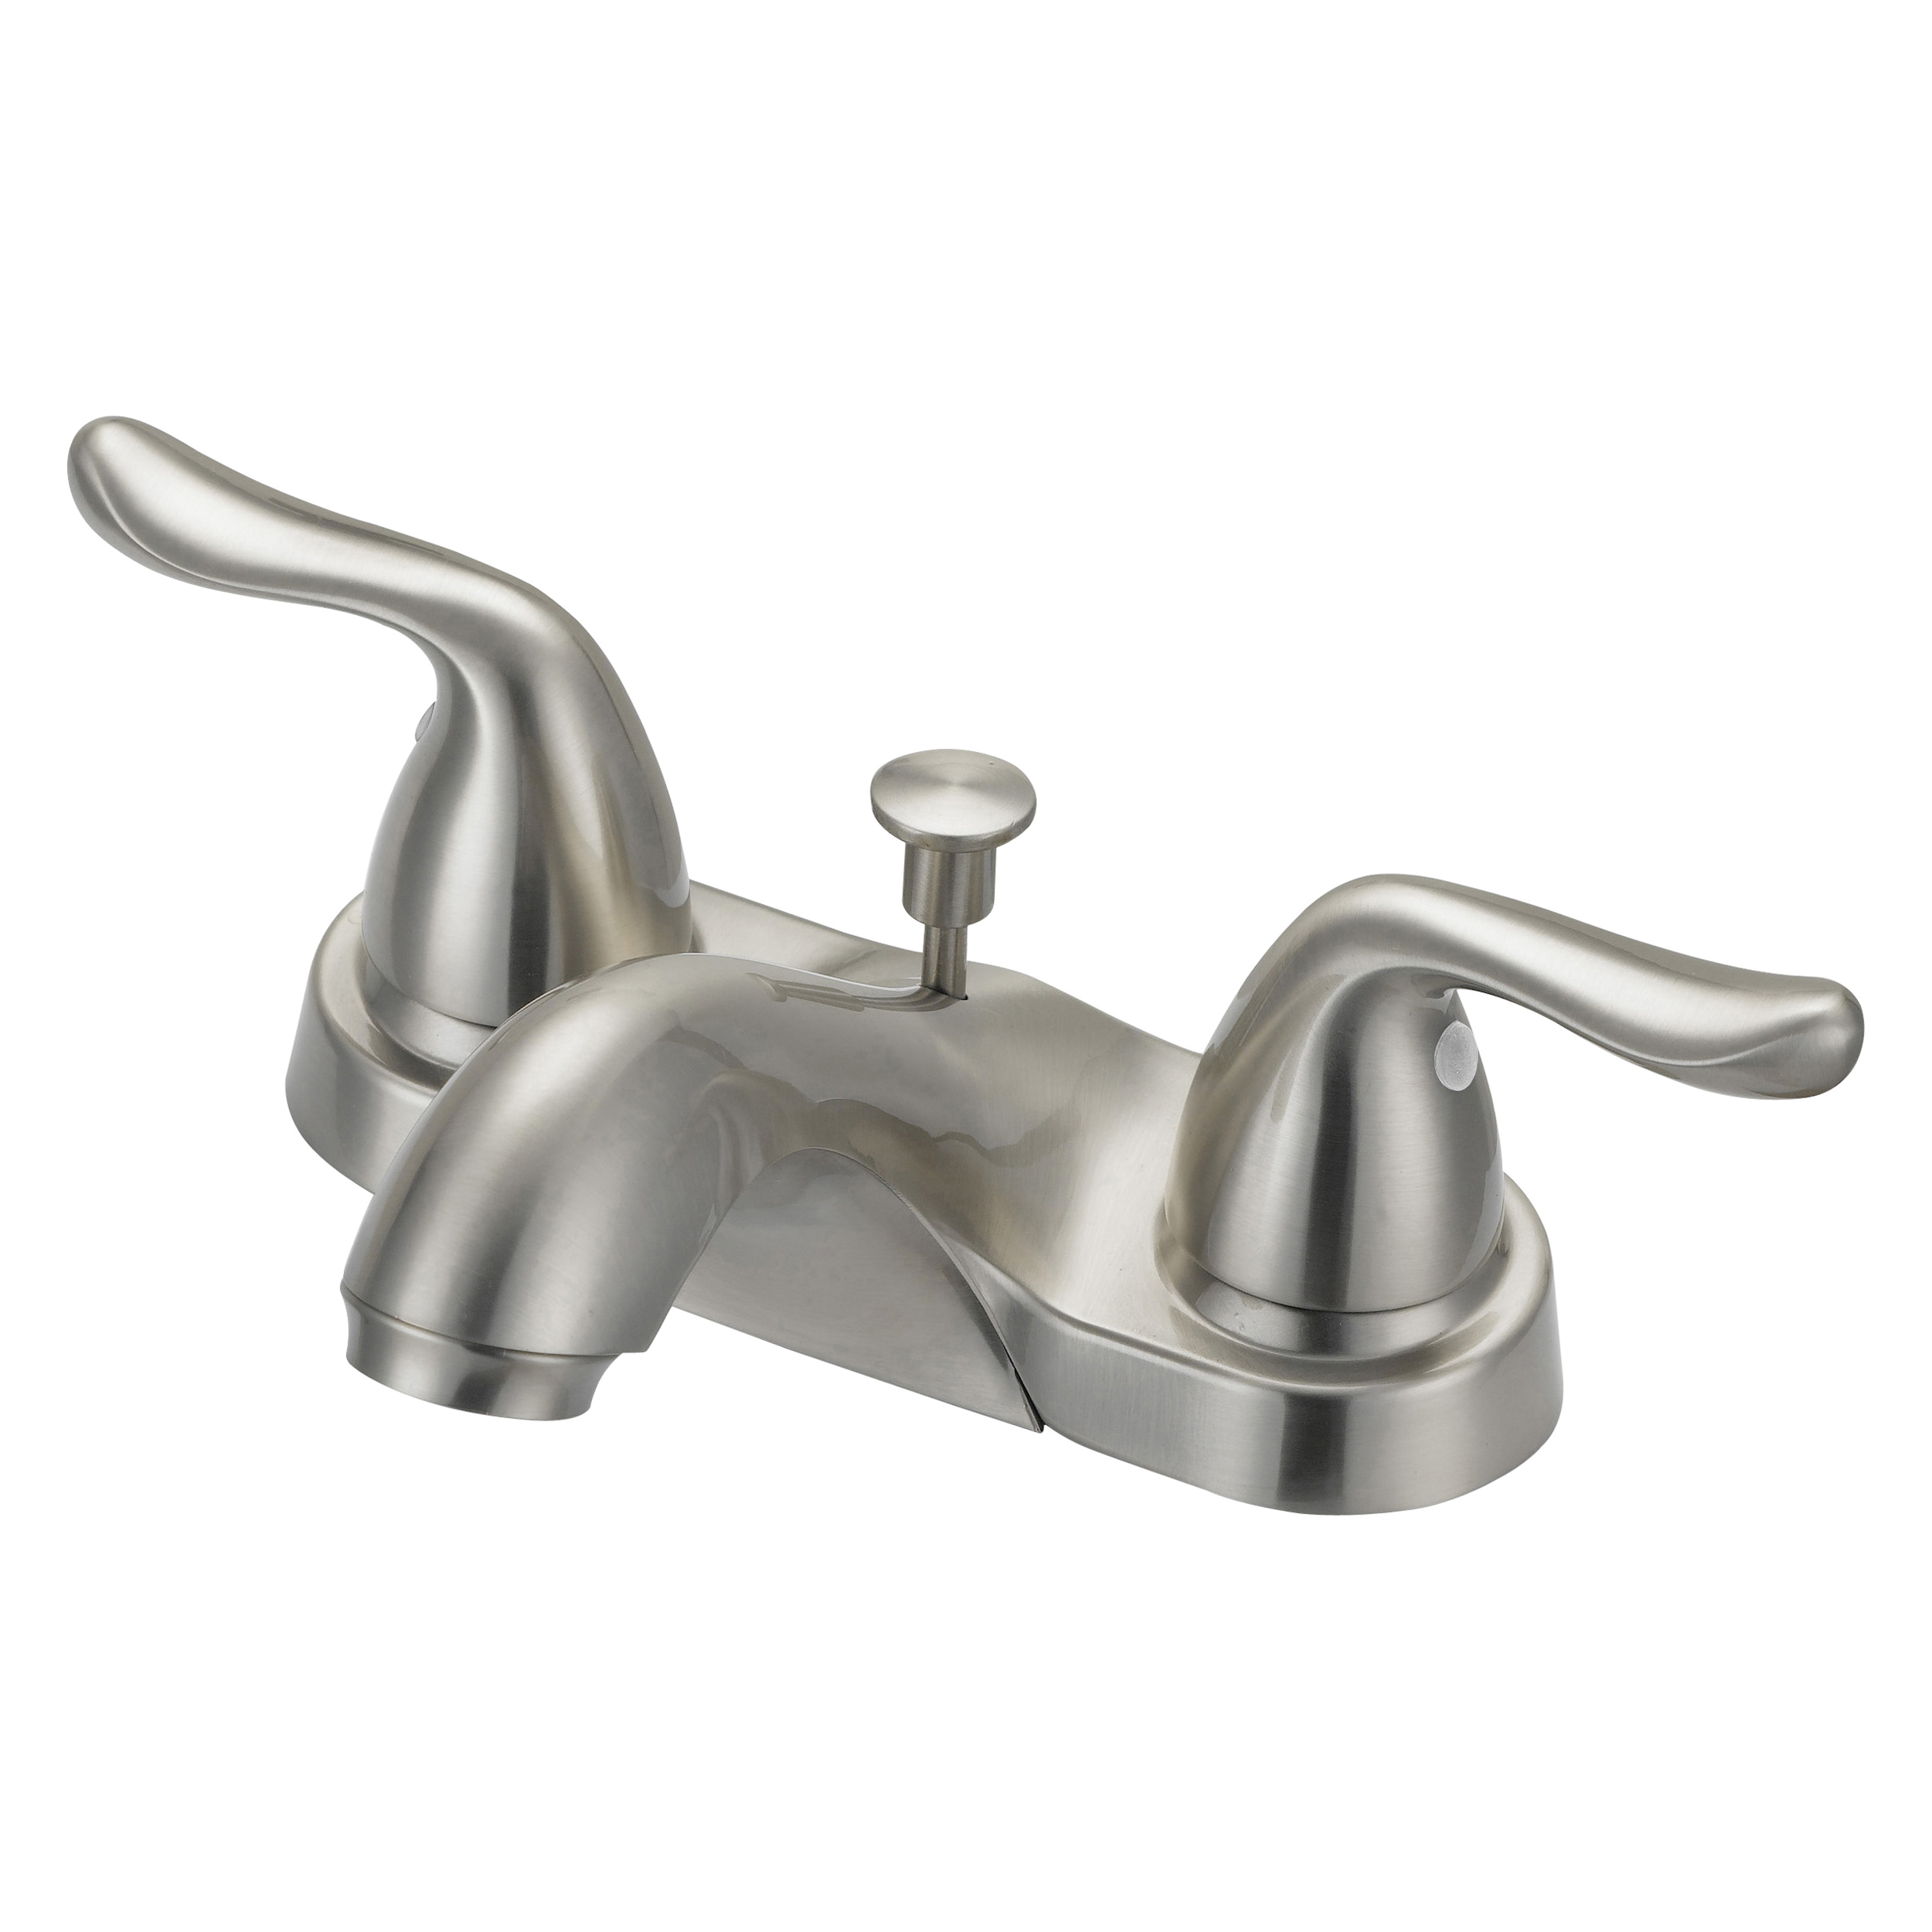 F5121033NP Lavatory Faucet, 1.2 gpm, 2-Faucet Handle, 3-Faucet Hole, Metal/Plastic, Brushed Nickel